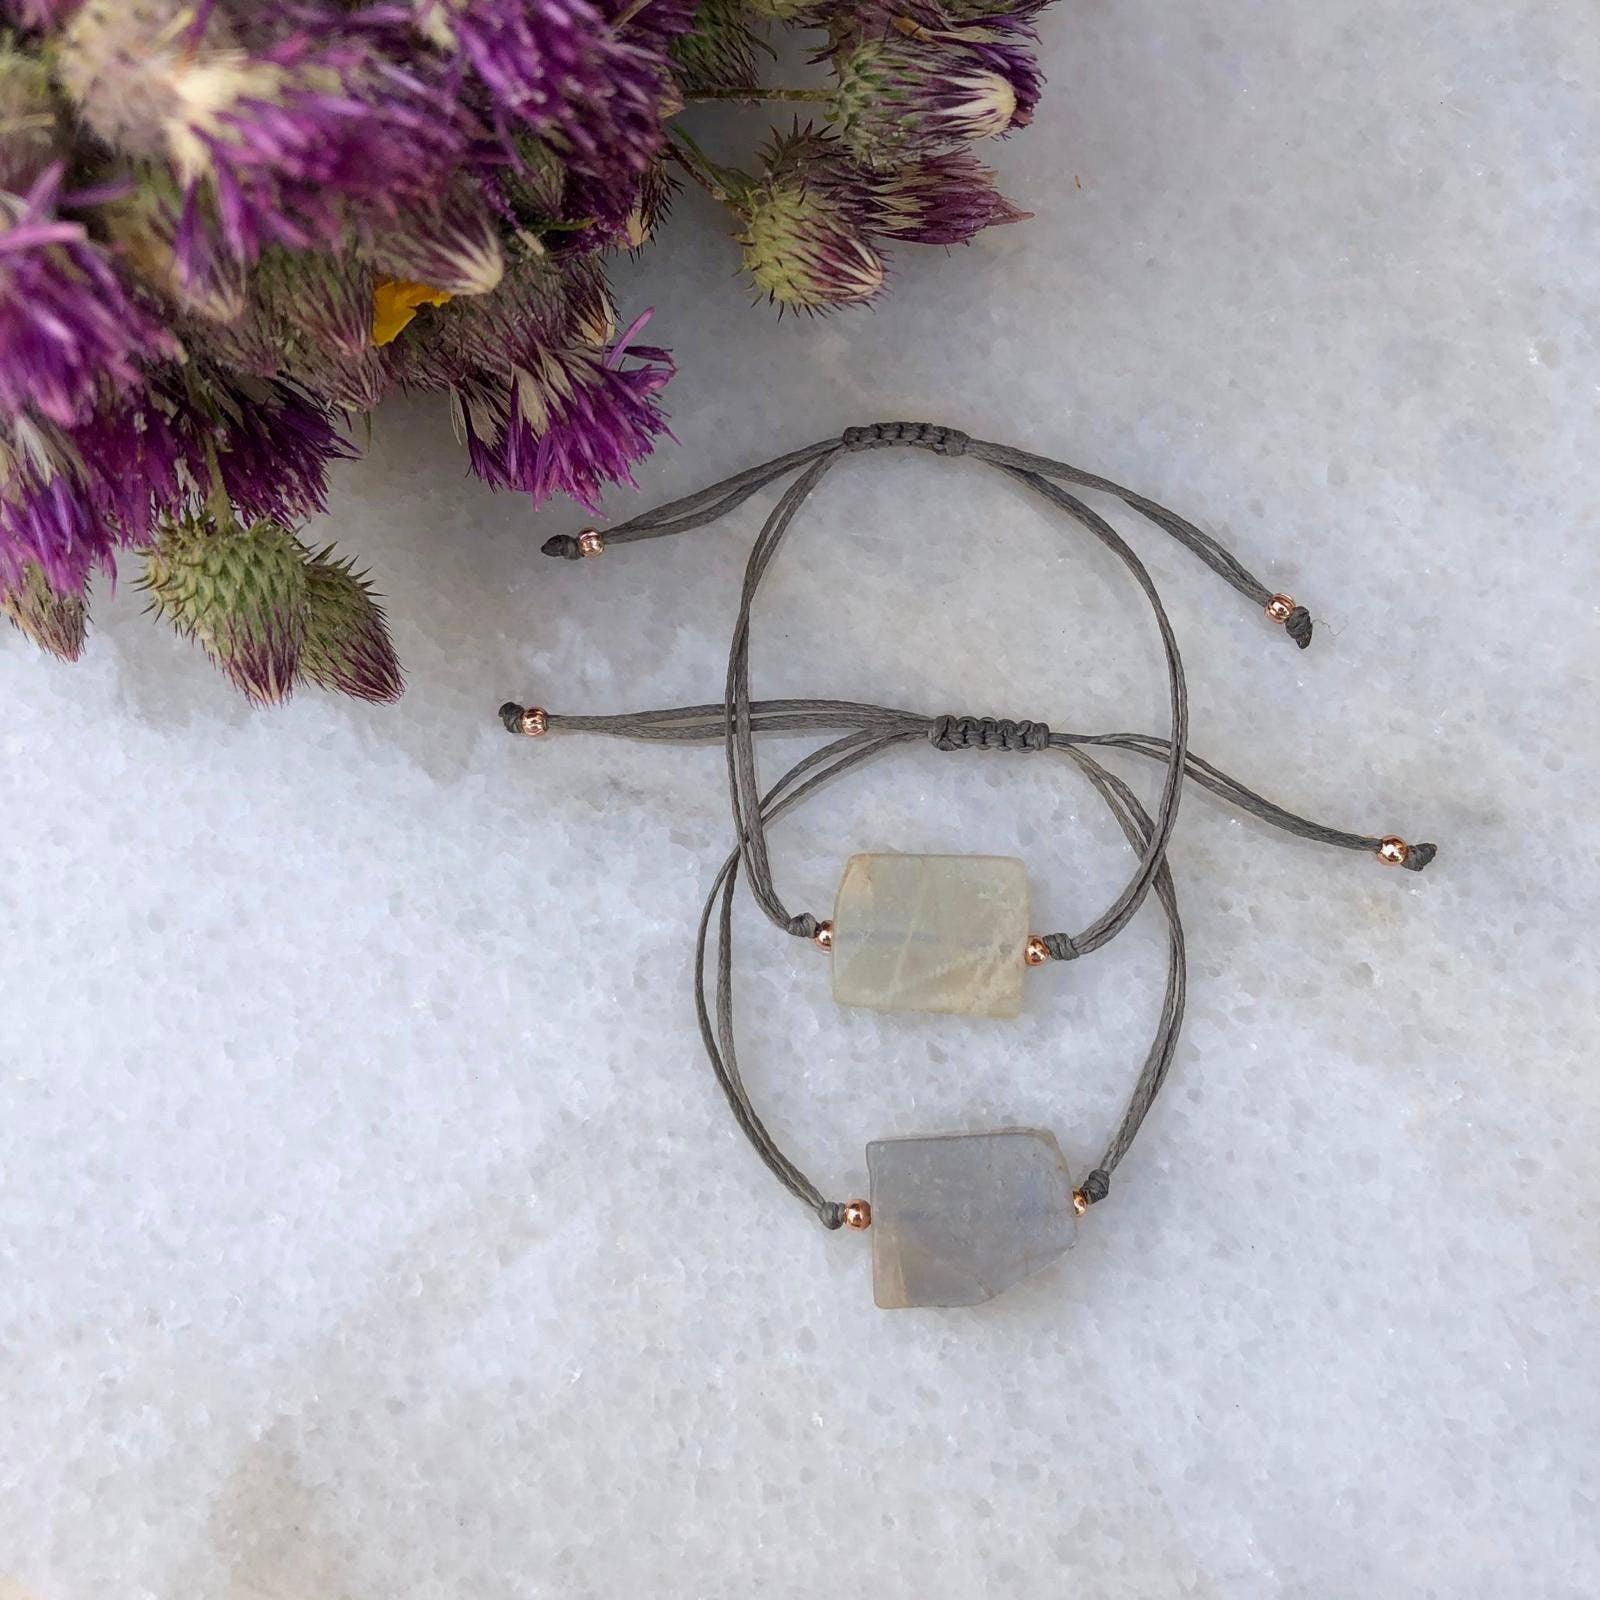 Adjustable Macrame Bracelet with Natural Moonstone - Perfect Mother's Day Gift from BeachPerfect.de